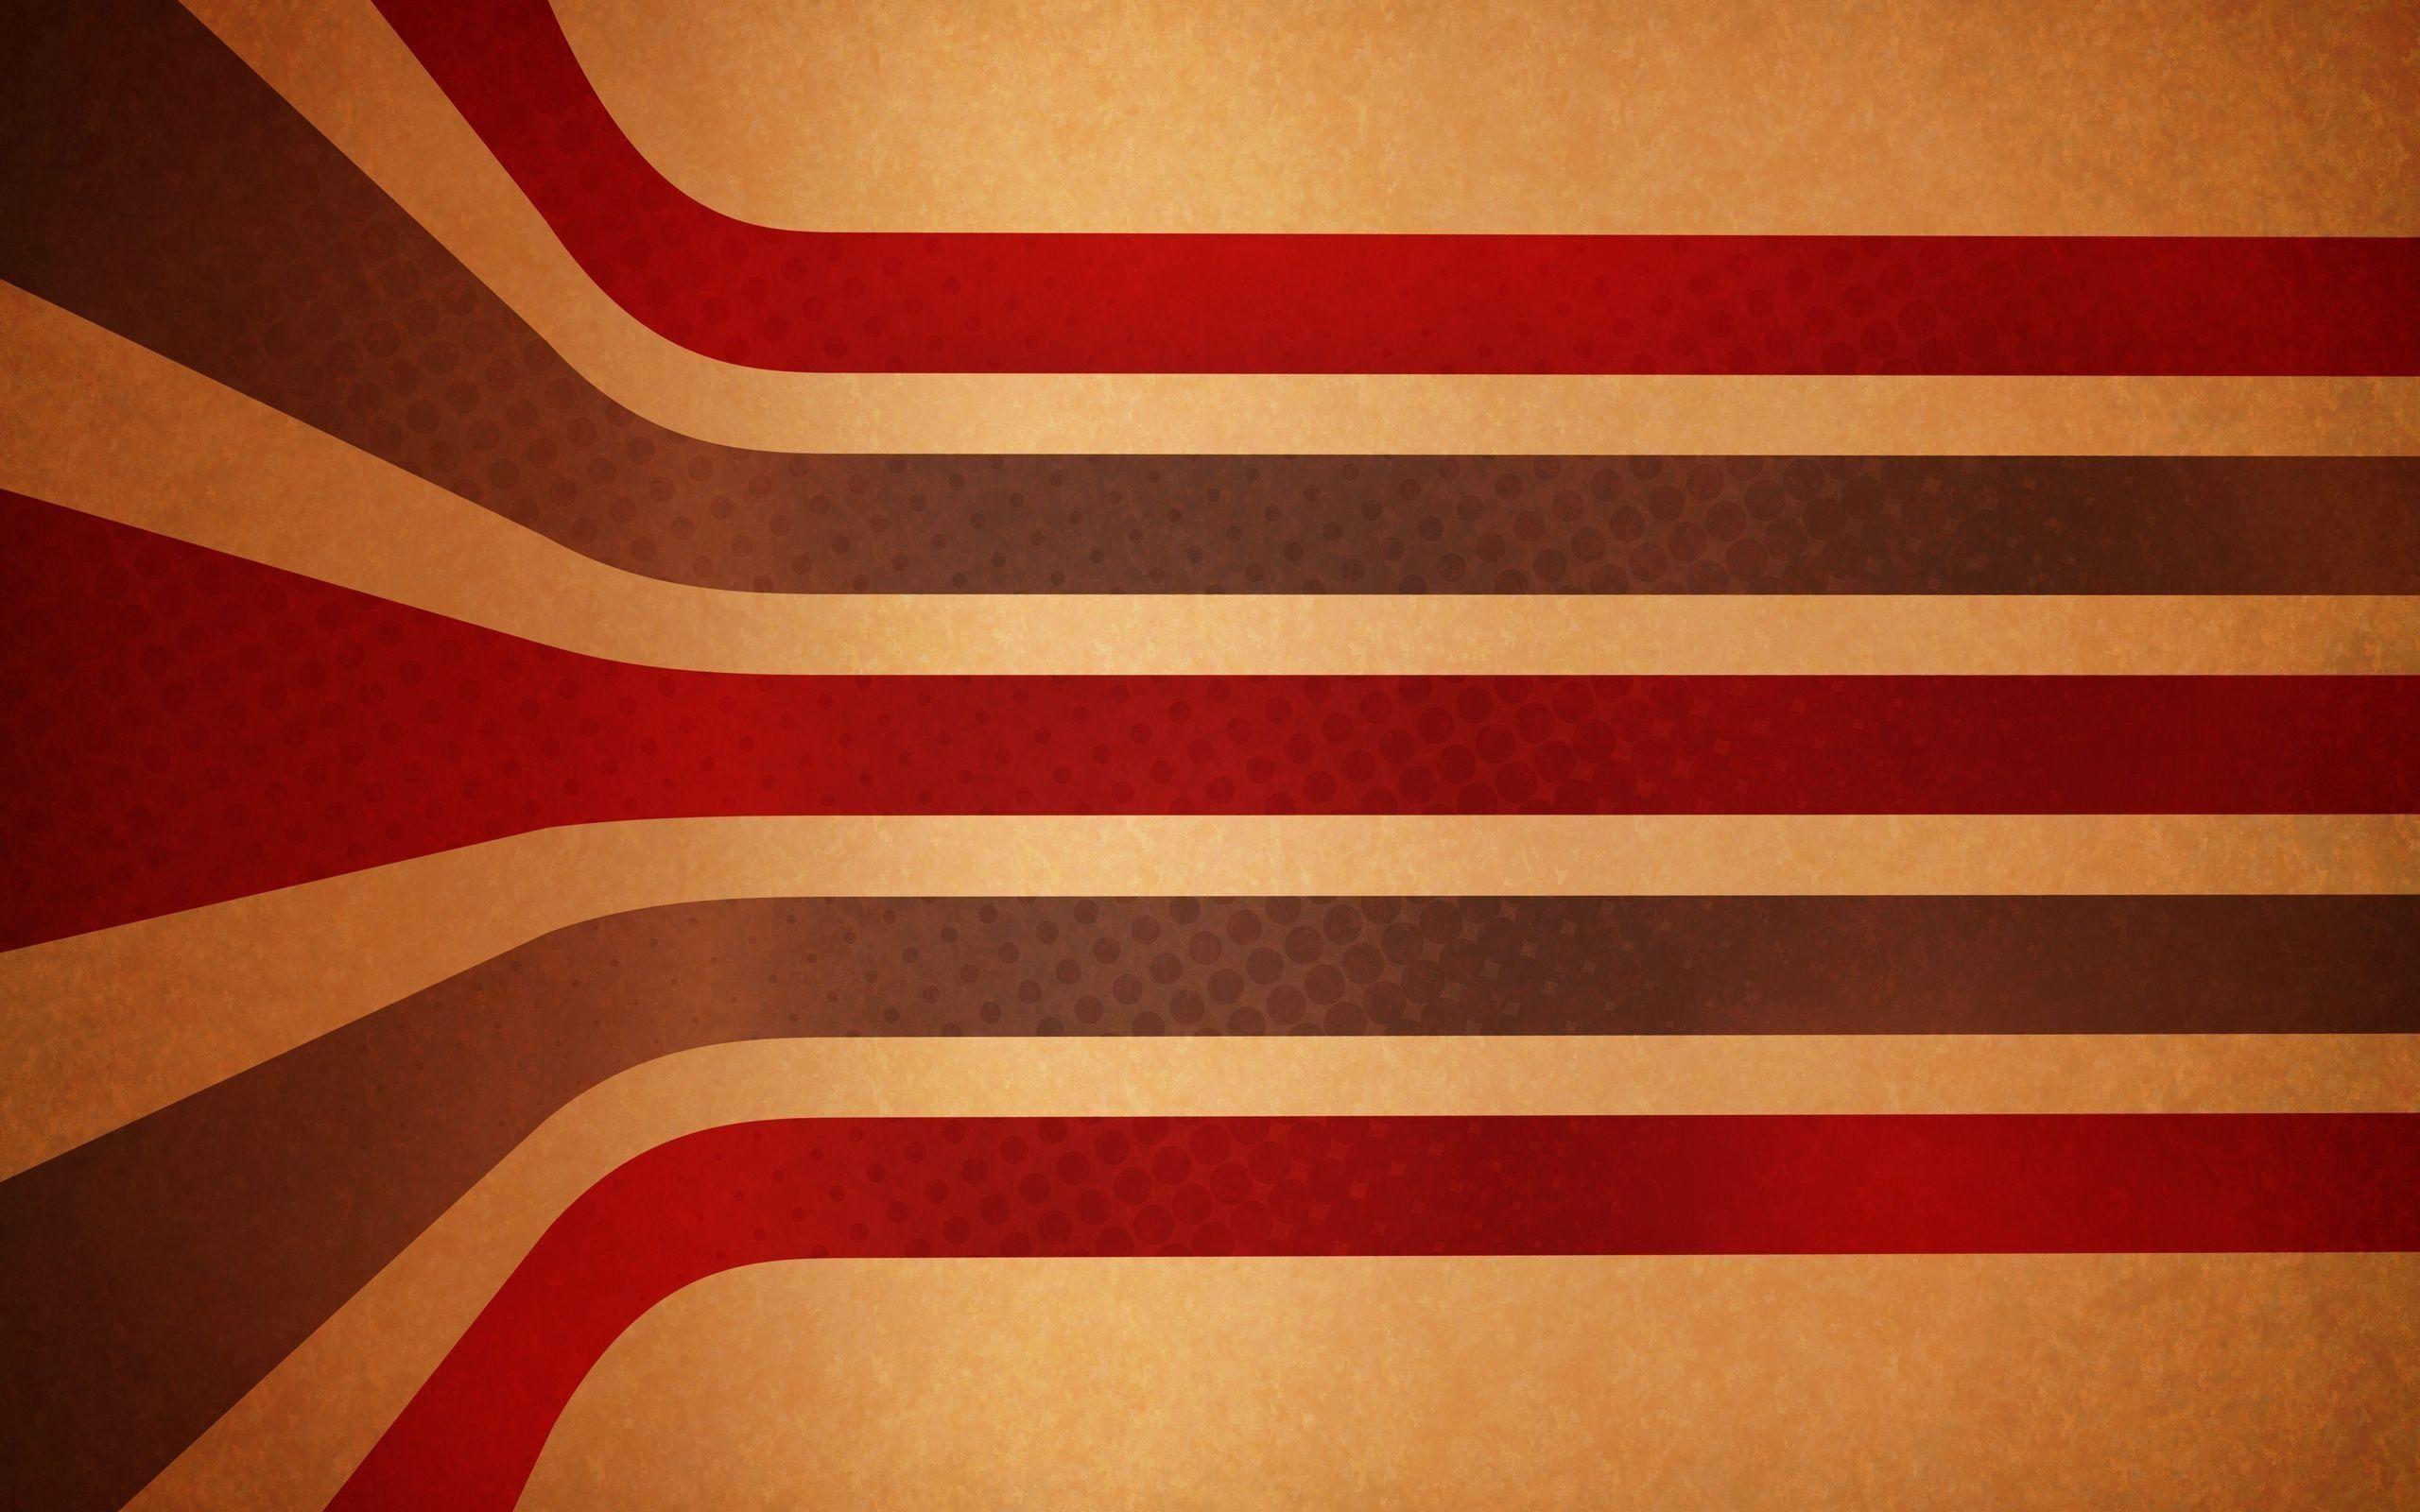 Red and Brown Wallpapers - Top Free Red and Brown Backgrounds ...